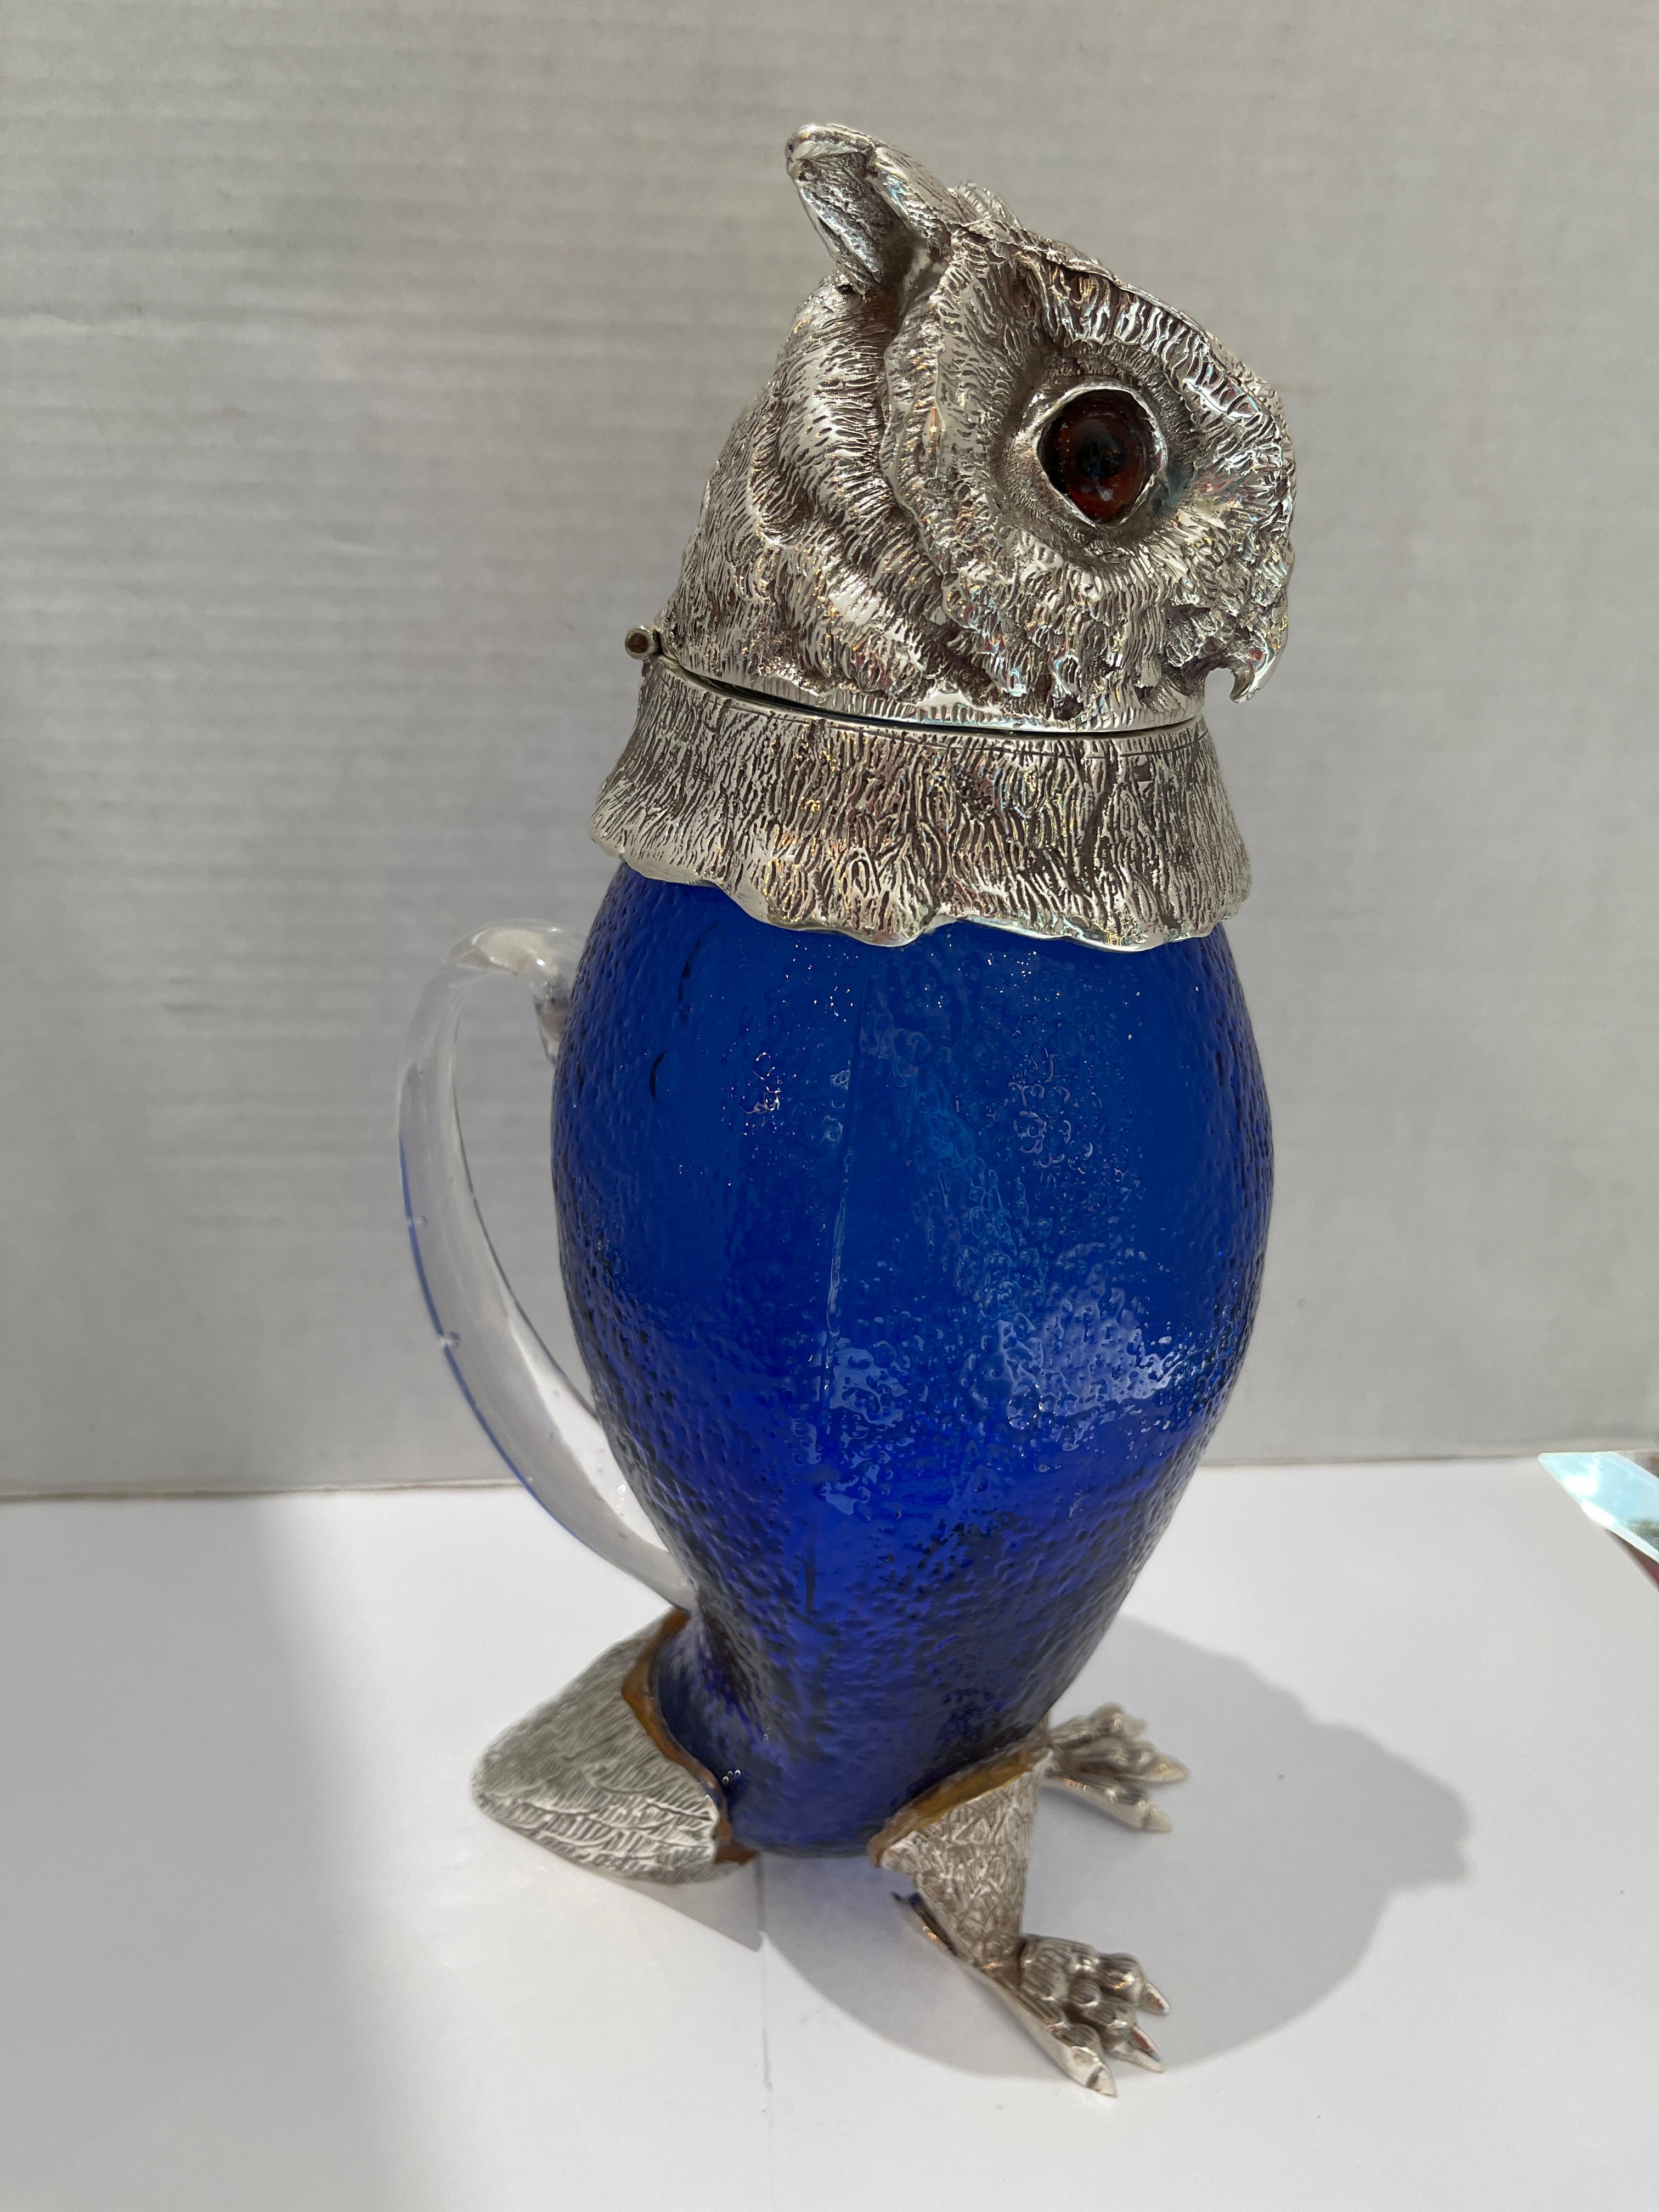 British Novelty Silver Plate and Cobalt Blue Glass Owl Claret Jug Decanter 20Th C. For Sale